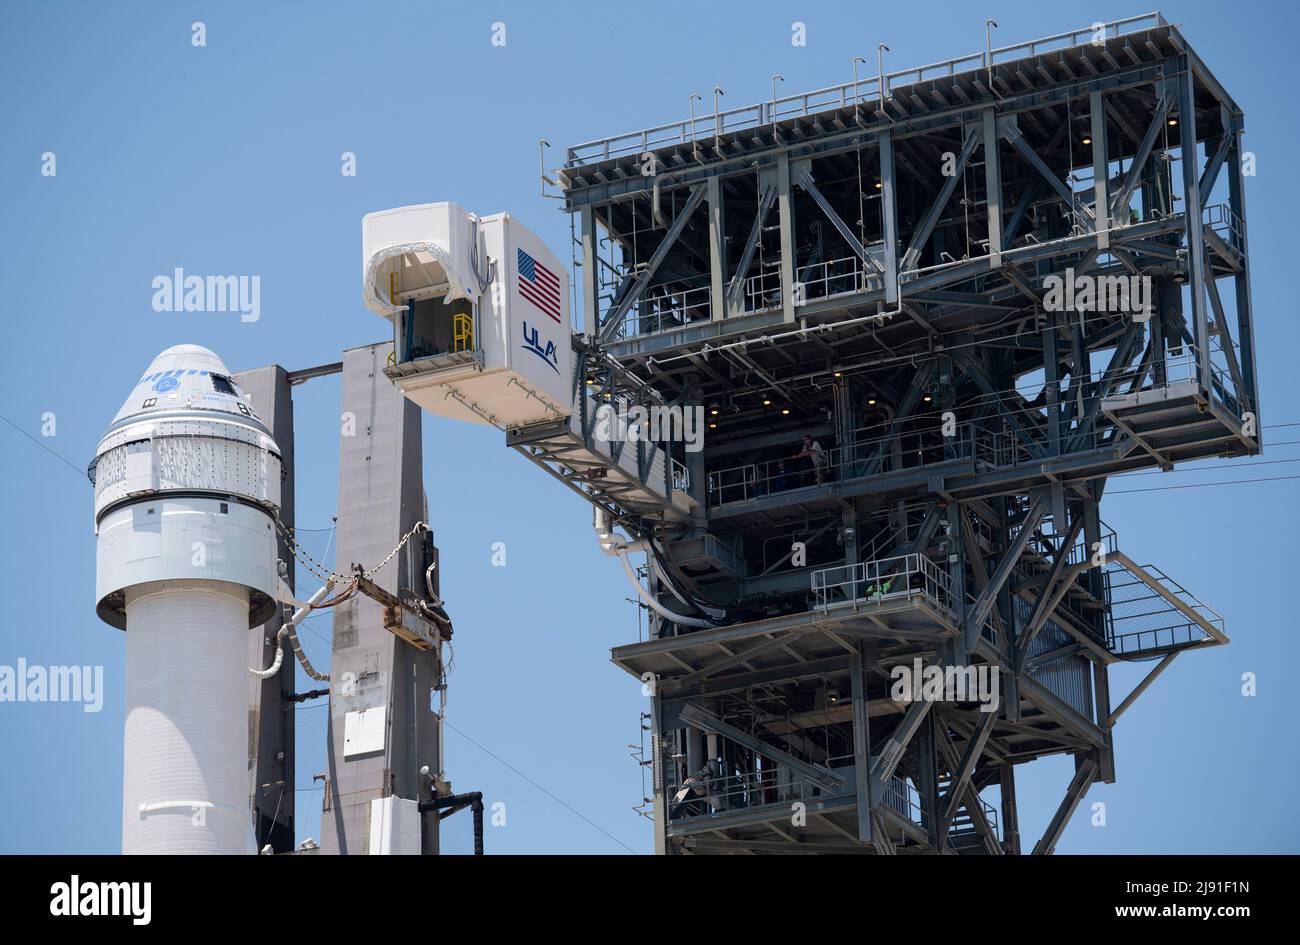 Cape Canaveral, United States of America. 18 May, 2022. The crew access arm attached to the United Launch Alliance Atlas V rocket carrying the Boeing CST-100 Starliner spacecraft aboard at Space Launch Complex 41 as it prepares for launch, May 18, 2022 in Cape Canaveral, Florida. The Orbital Flight Test-2 will be second un-crewed flight test and will dock to the International Space Station and is expected to lift off May 19th. Credit: Joel Kowsky/NASA/Alamy Live News Stock Photo